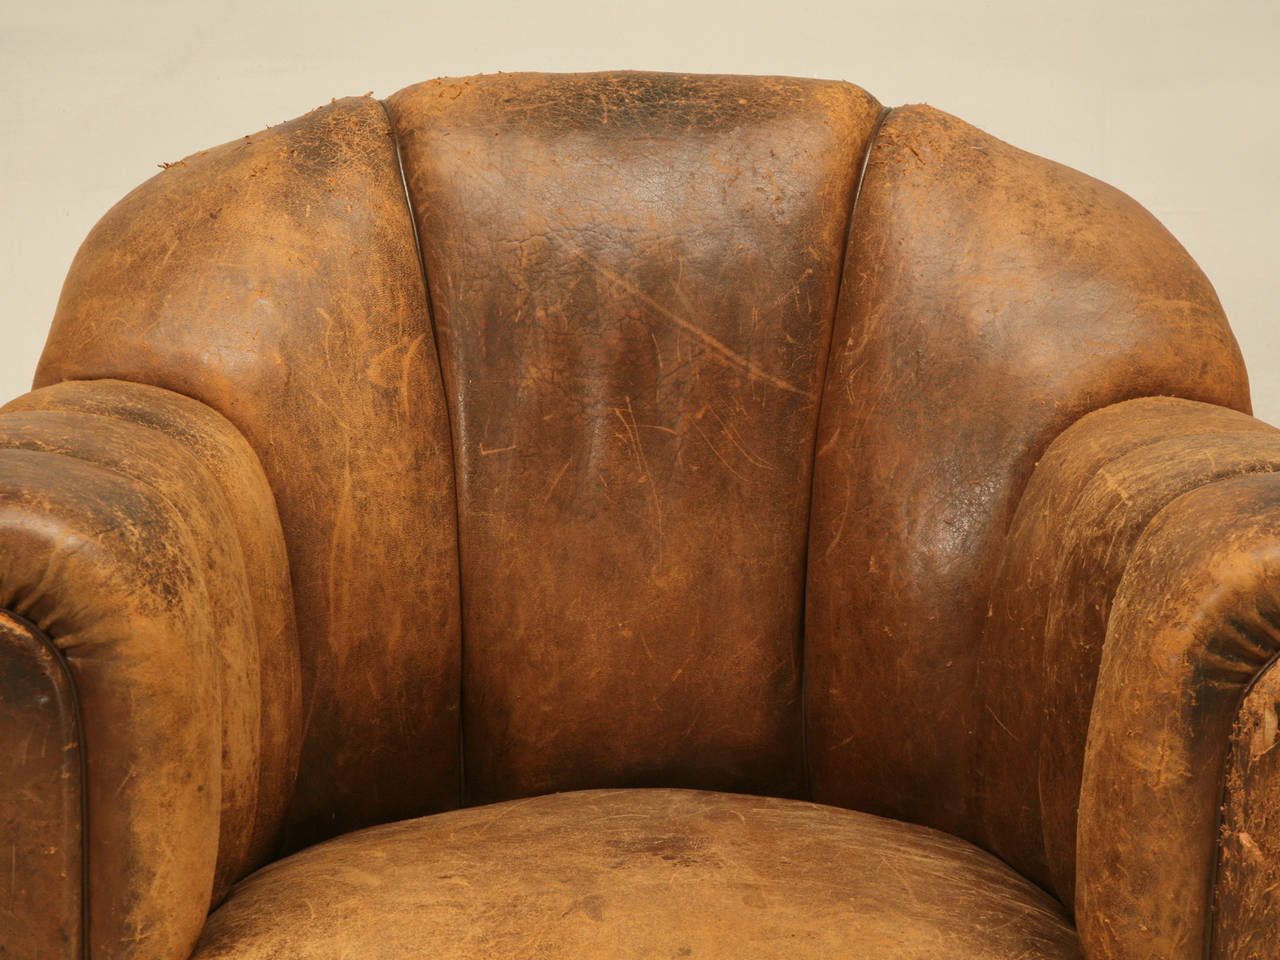 In trying to describe this old leather French chair, I do not really know if it was a club chair, or living room chair, or possibly from a gentleman's office? What I do know is that this is the epitome of what a chair should sit like. We stock over